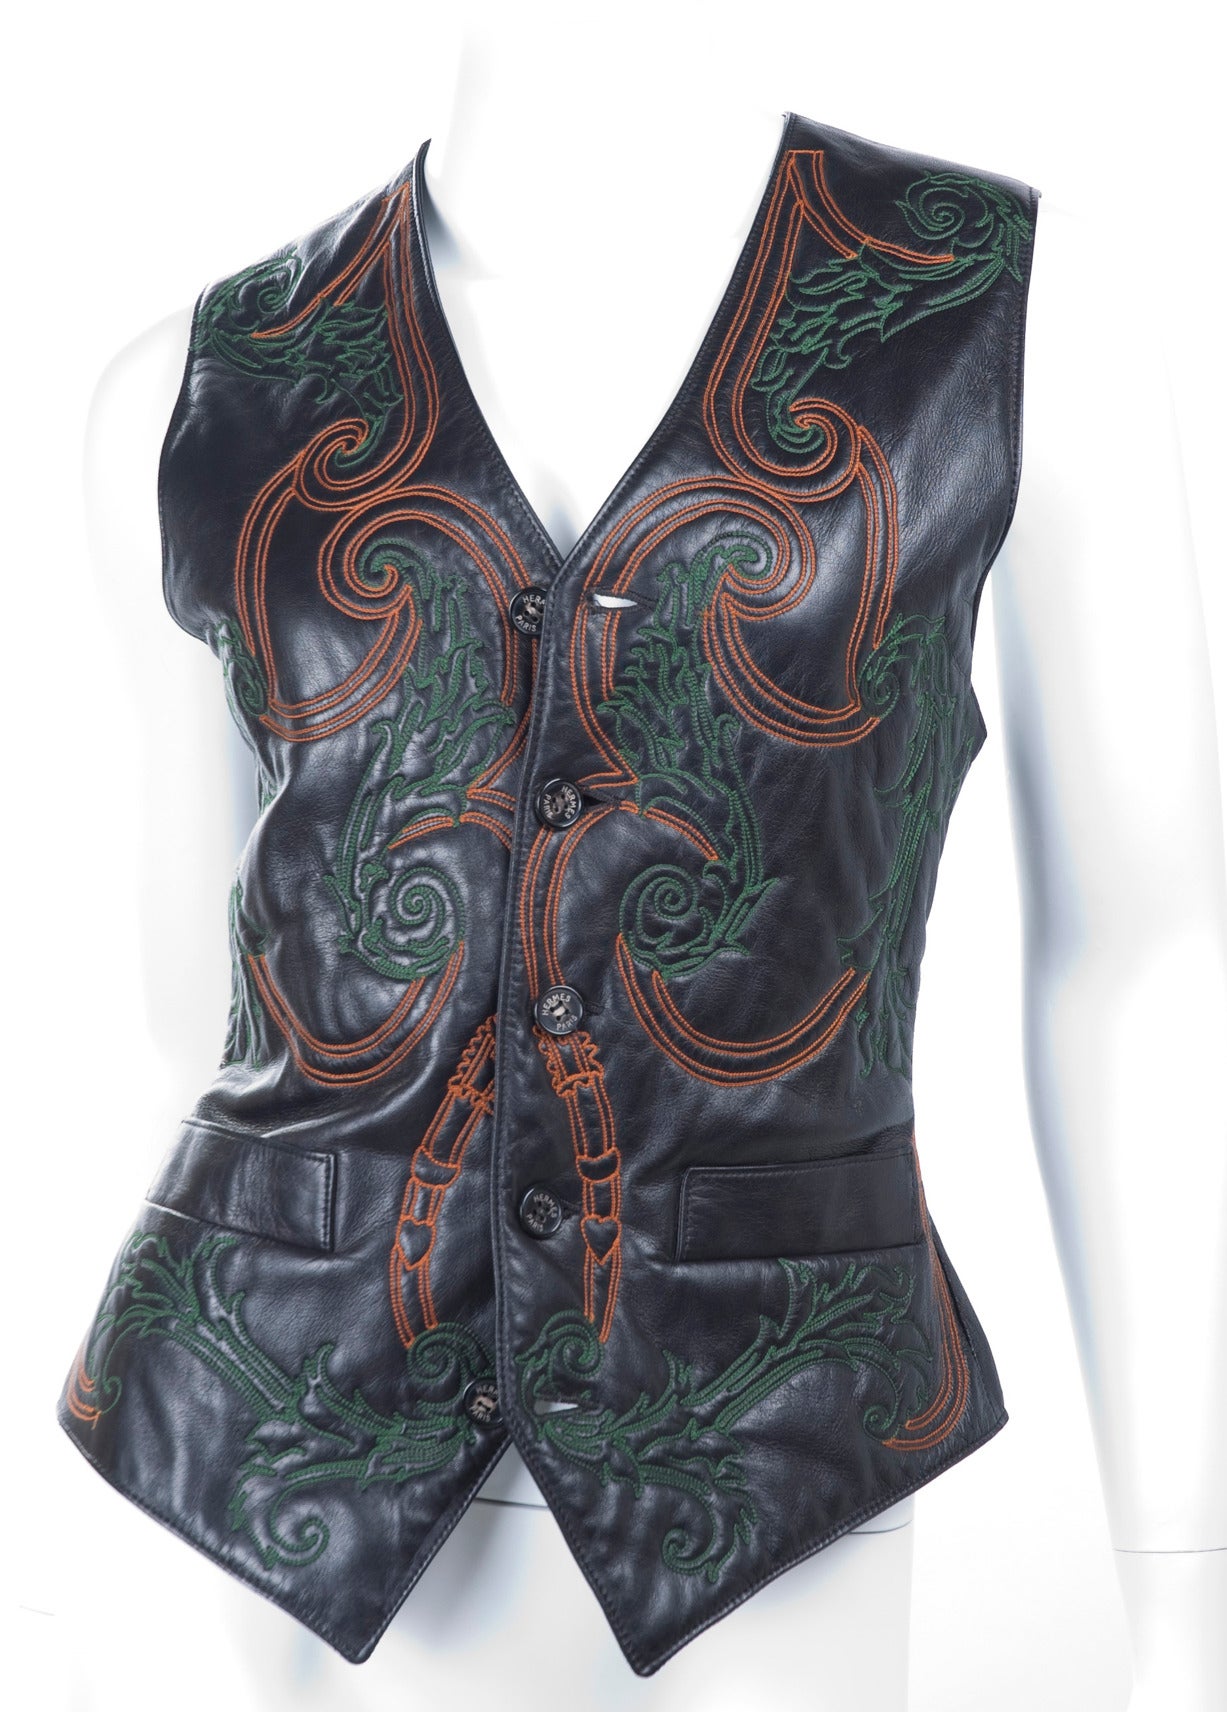 90's Hermes Embroidered Leather Vest.
Black leather back and front, embroidery in bottle green and orange.
Size 46 EU

Mesurement:
Bust 36 inches - 91 cm